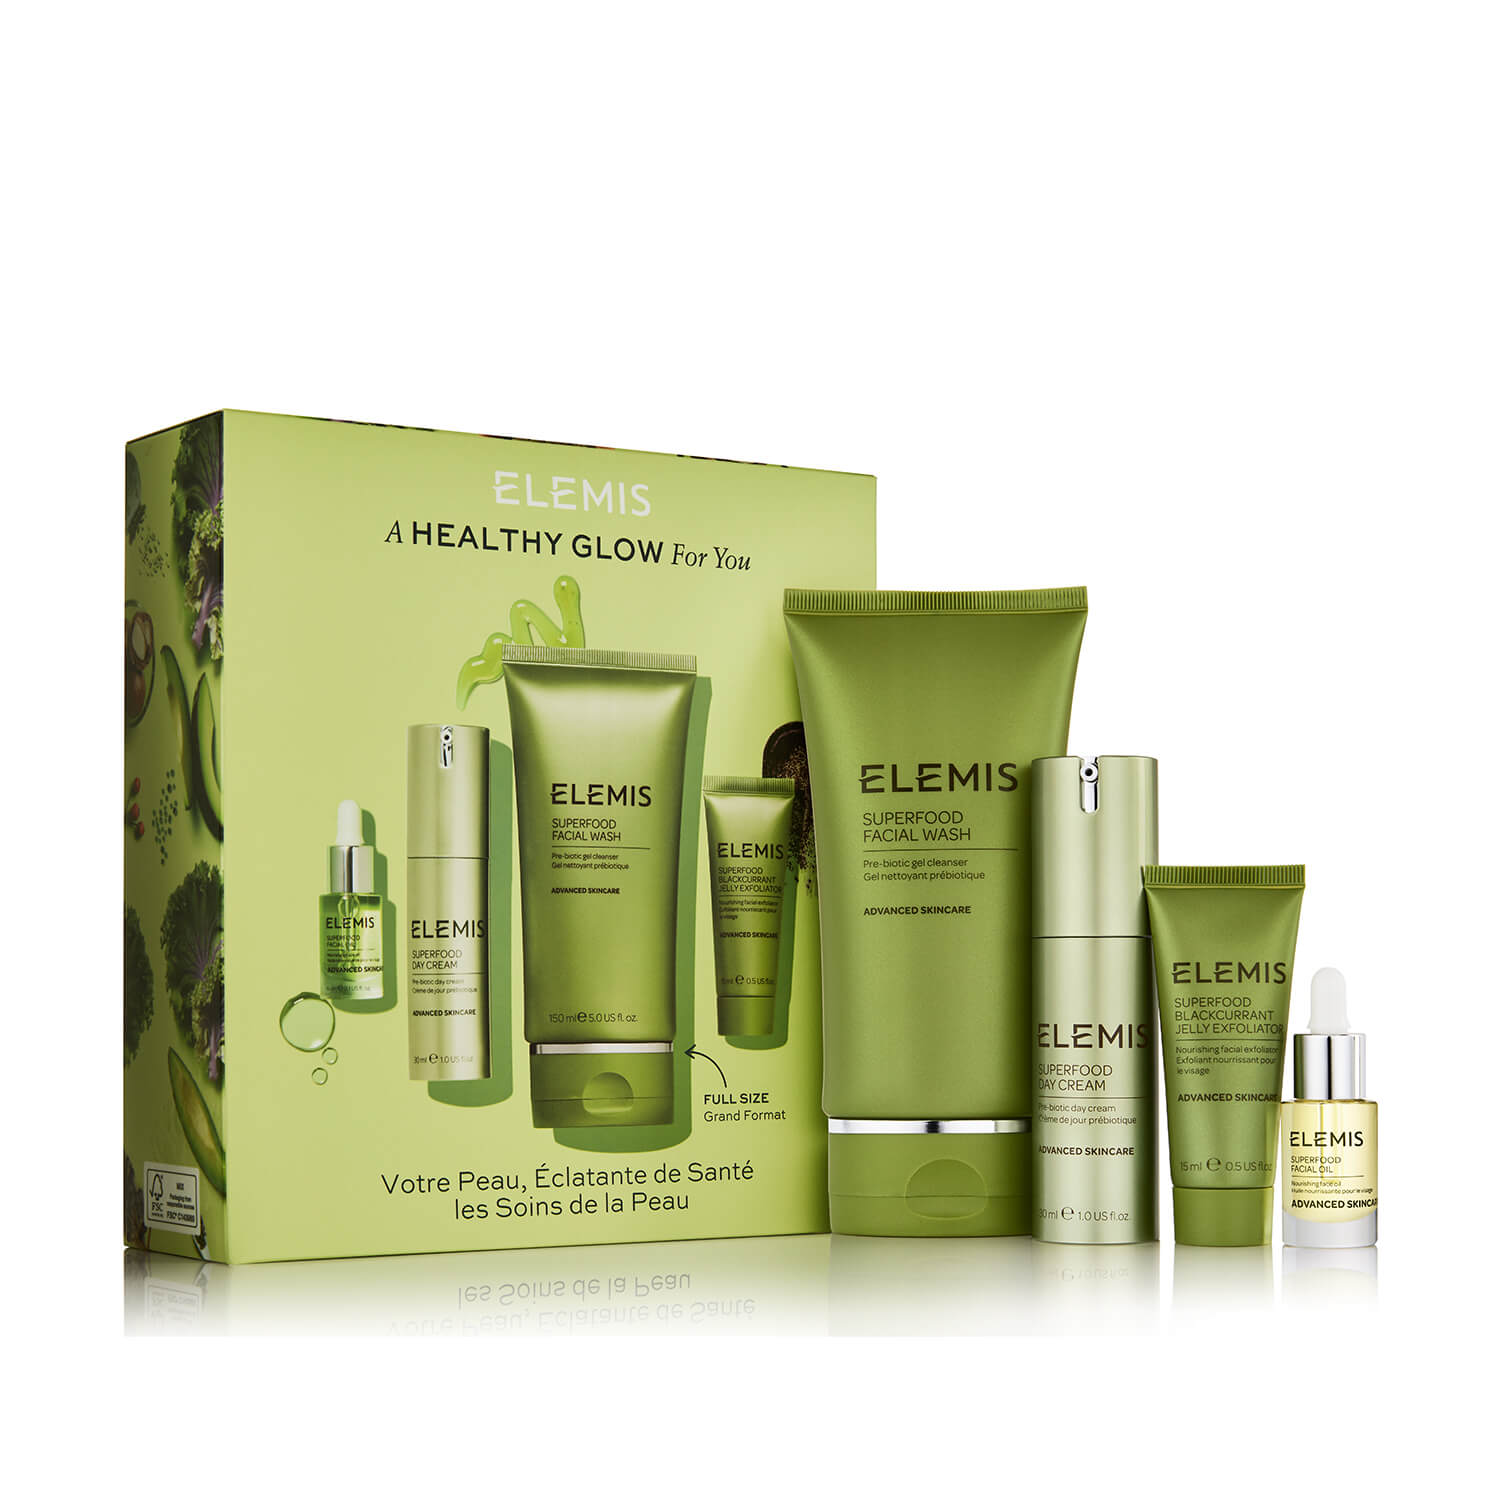 Elemis A Healthy Glow for You